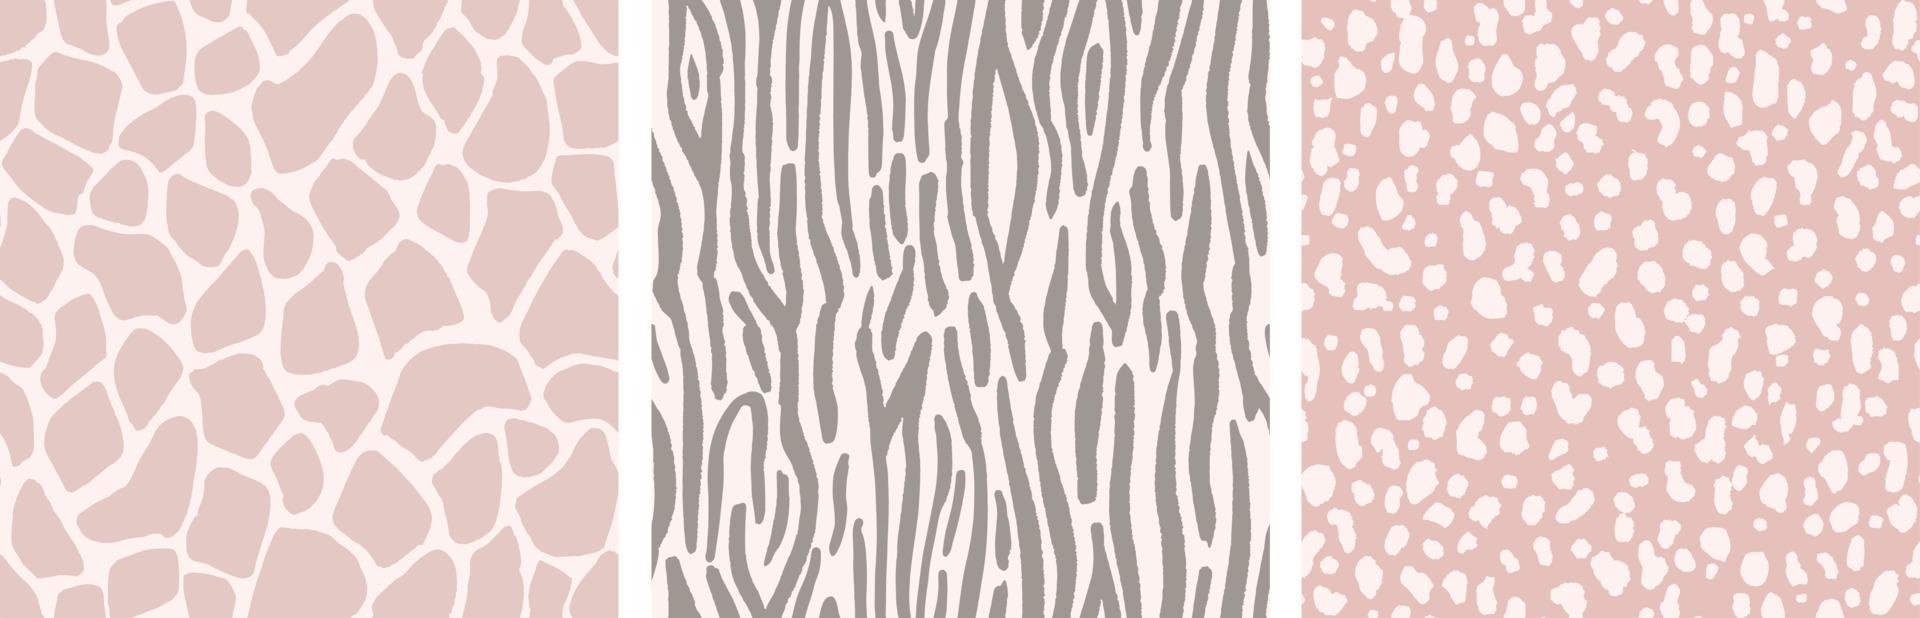 Animal skin vector patterns. Hand drawn animal prints. Giraffe pattern, zebra pattern, dalmatian pattern. Seamless abstract backgrounds and textures with hand painted brush strokes.